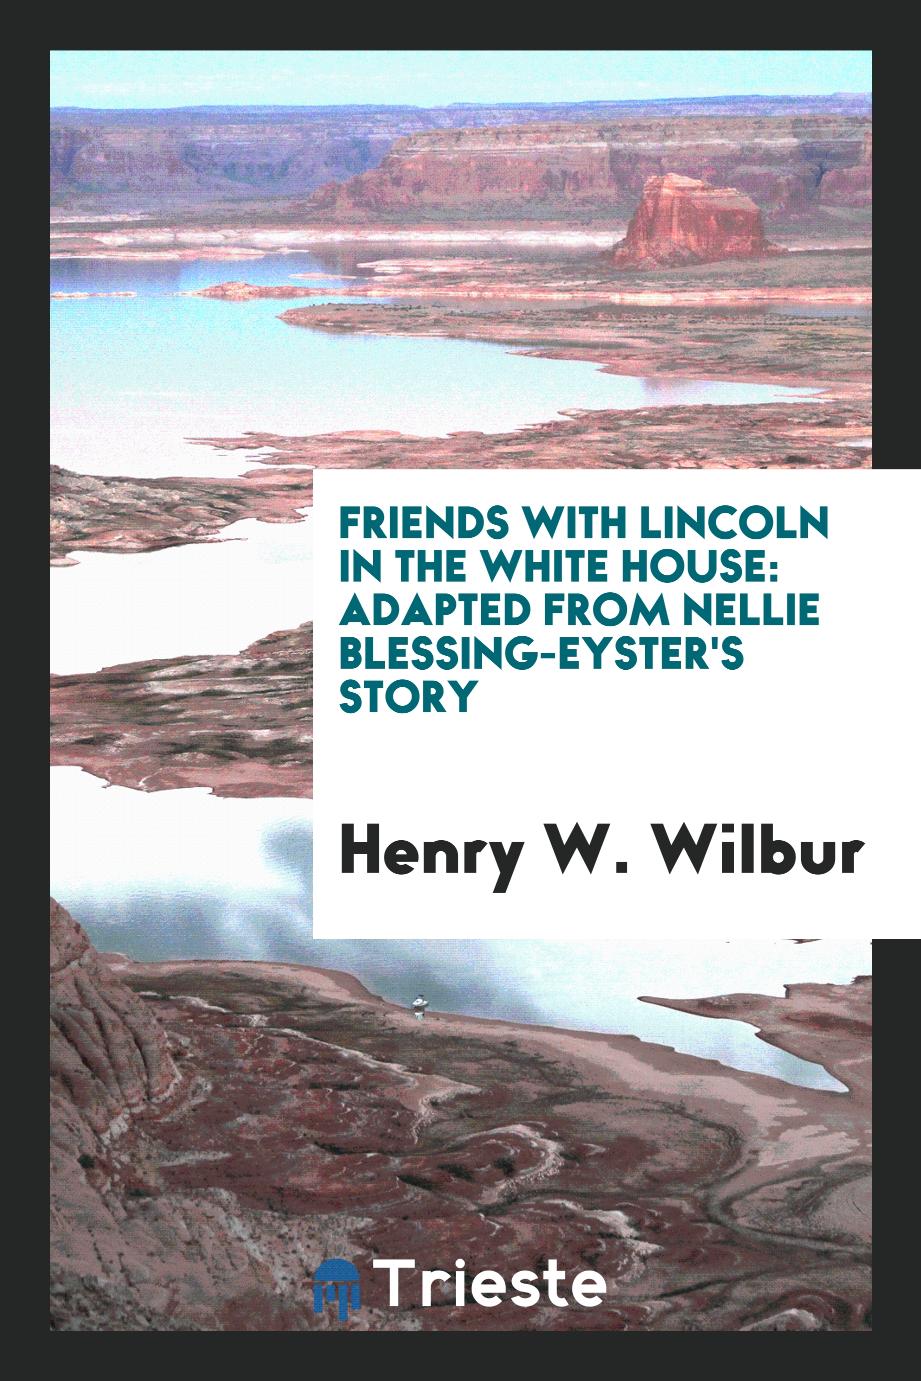 Friends with Lincoln in the White House: adapted from Nellie Blessing-Eyster's story